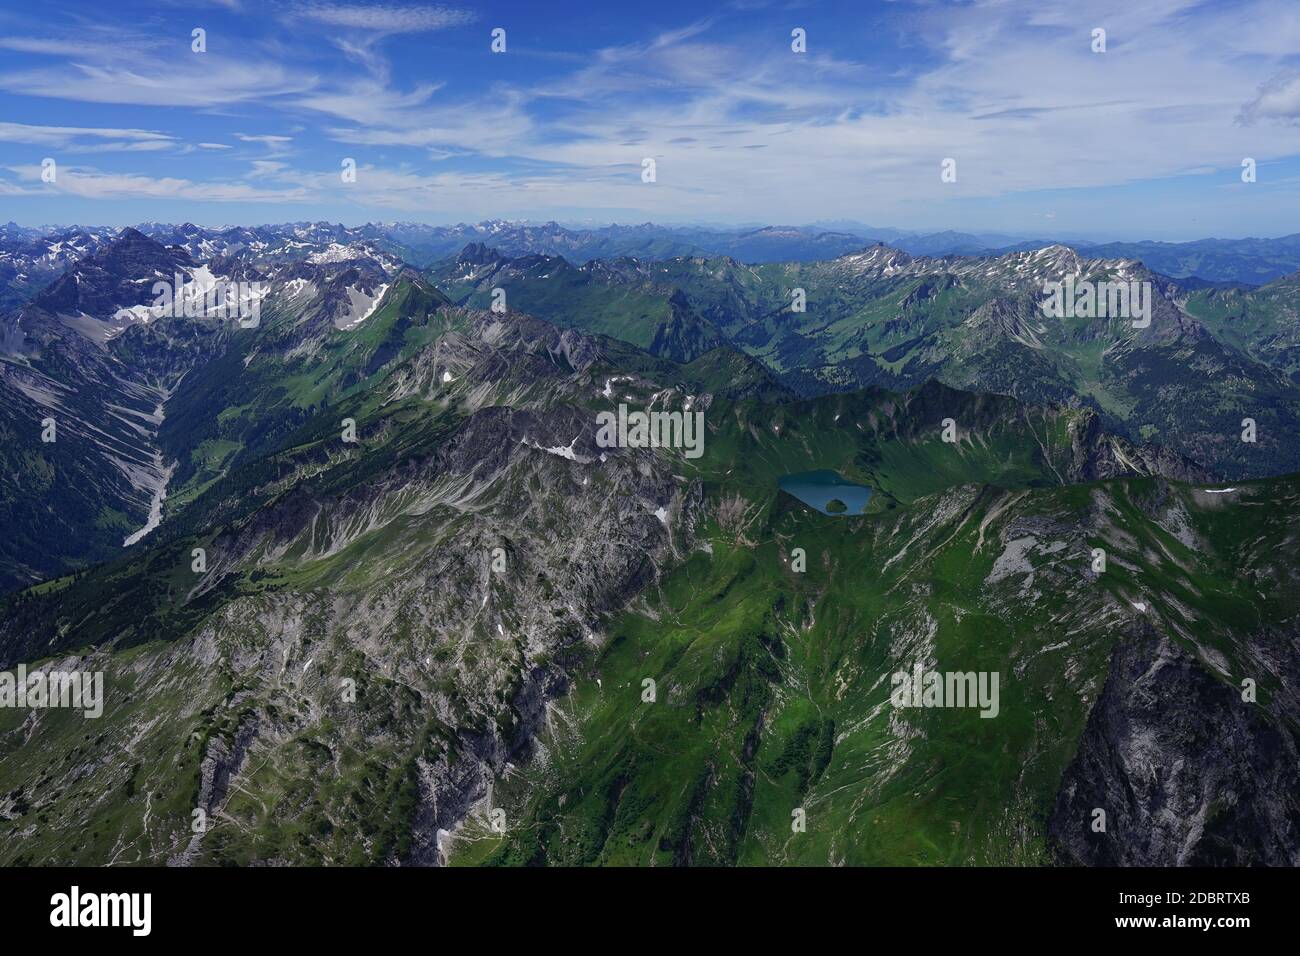 Aerial view of Schrecksee in AllgÃ¤u and the mountains in Austria. Stock Photo